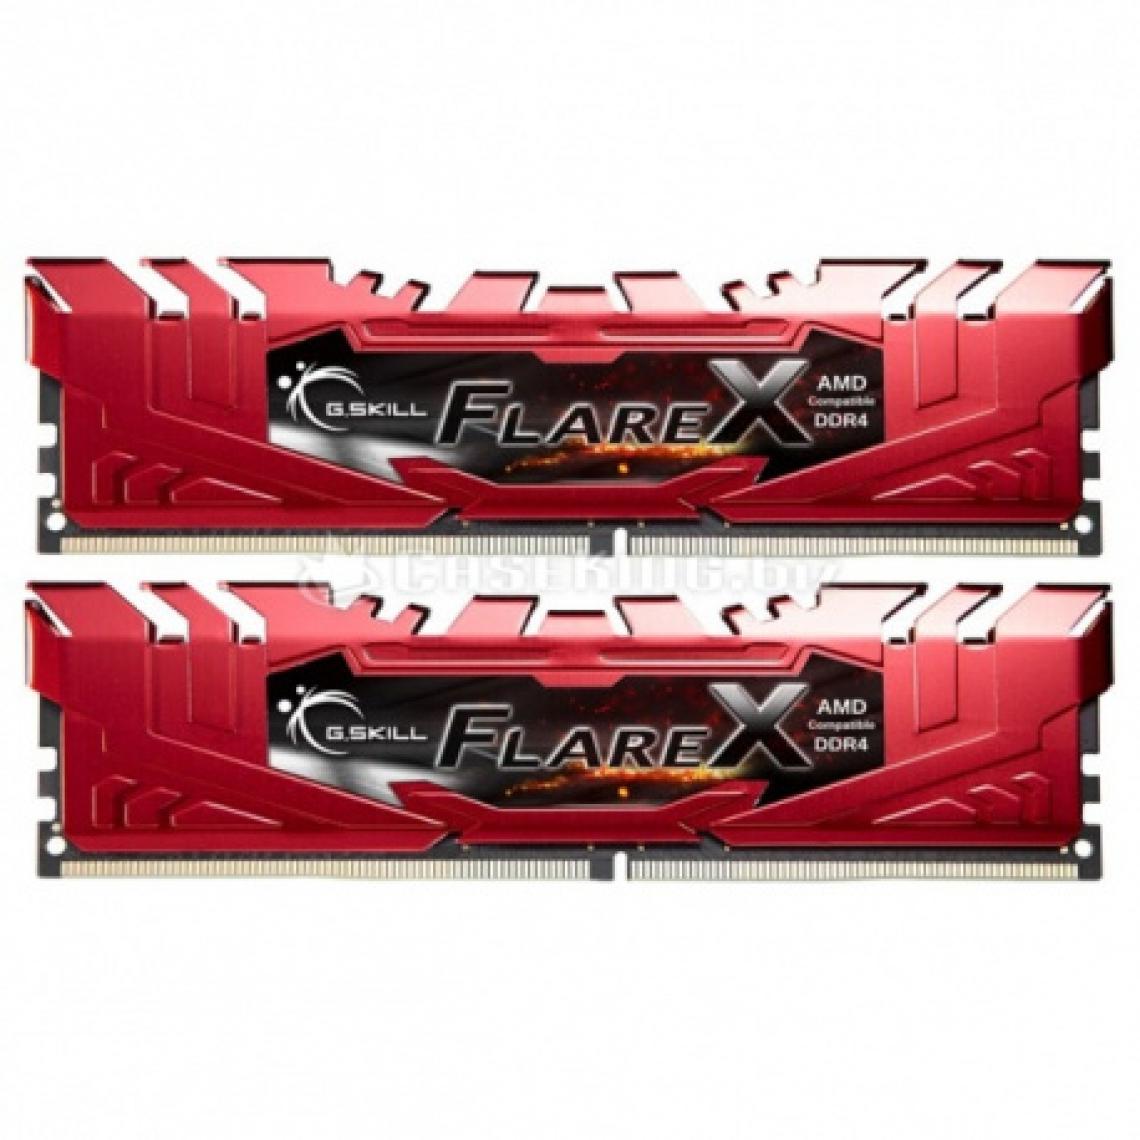 Gskill - Flare X Series Rouge 16 Go (2x 8 Go) DDR4 2400 MHz CL15 - RAM PC Fixe